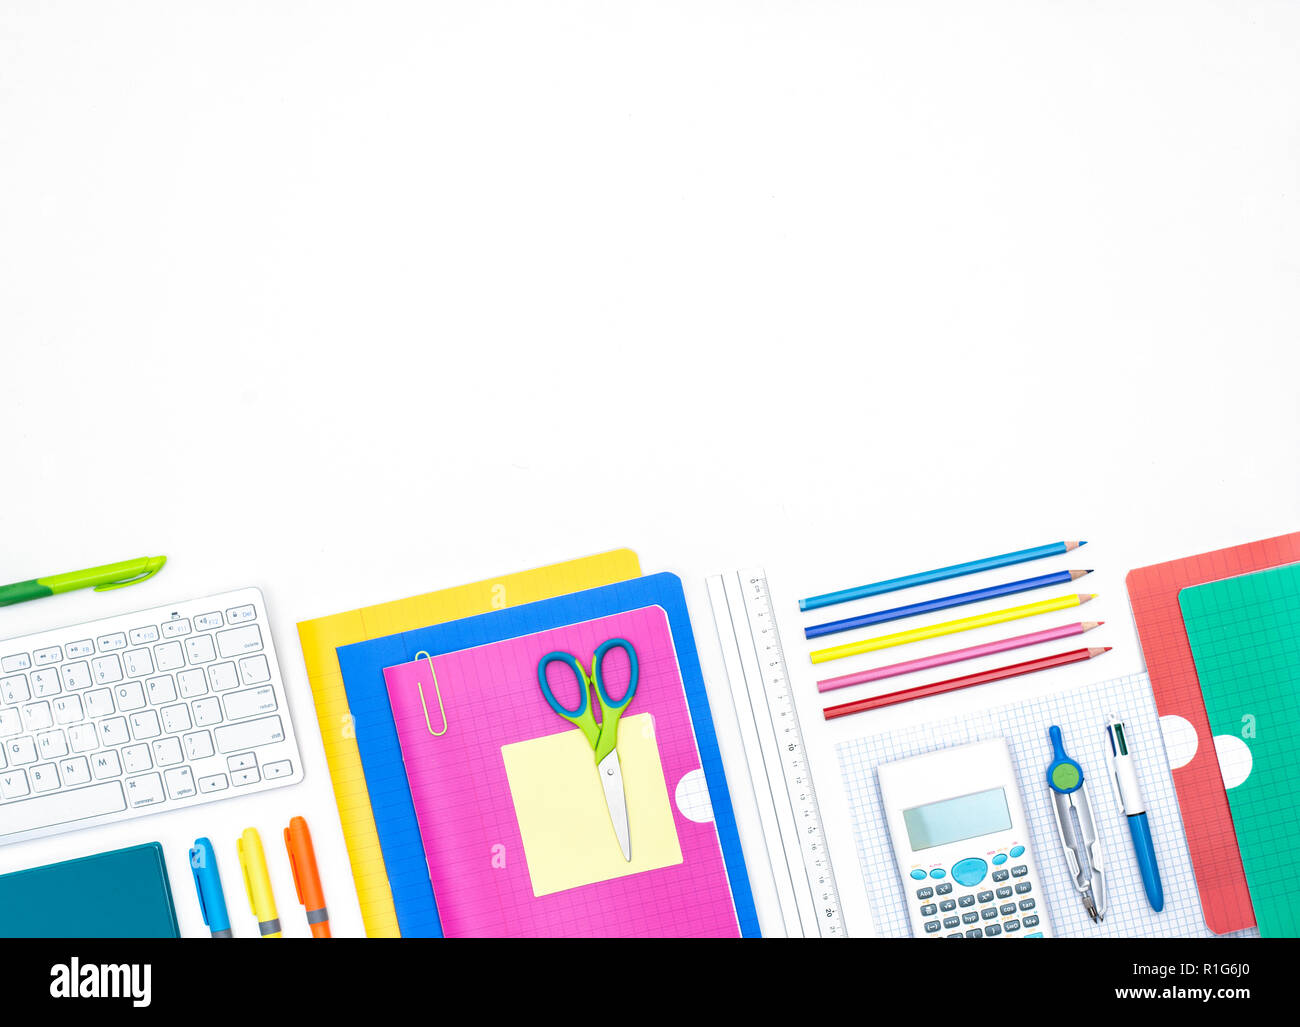 Back to school background header on white. Colorful school items. Stock Photo